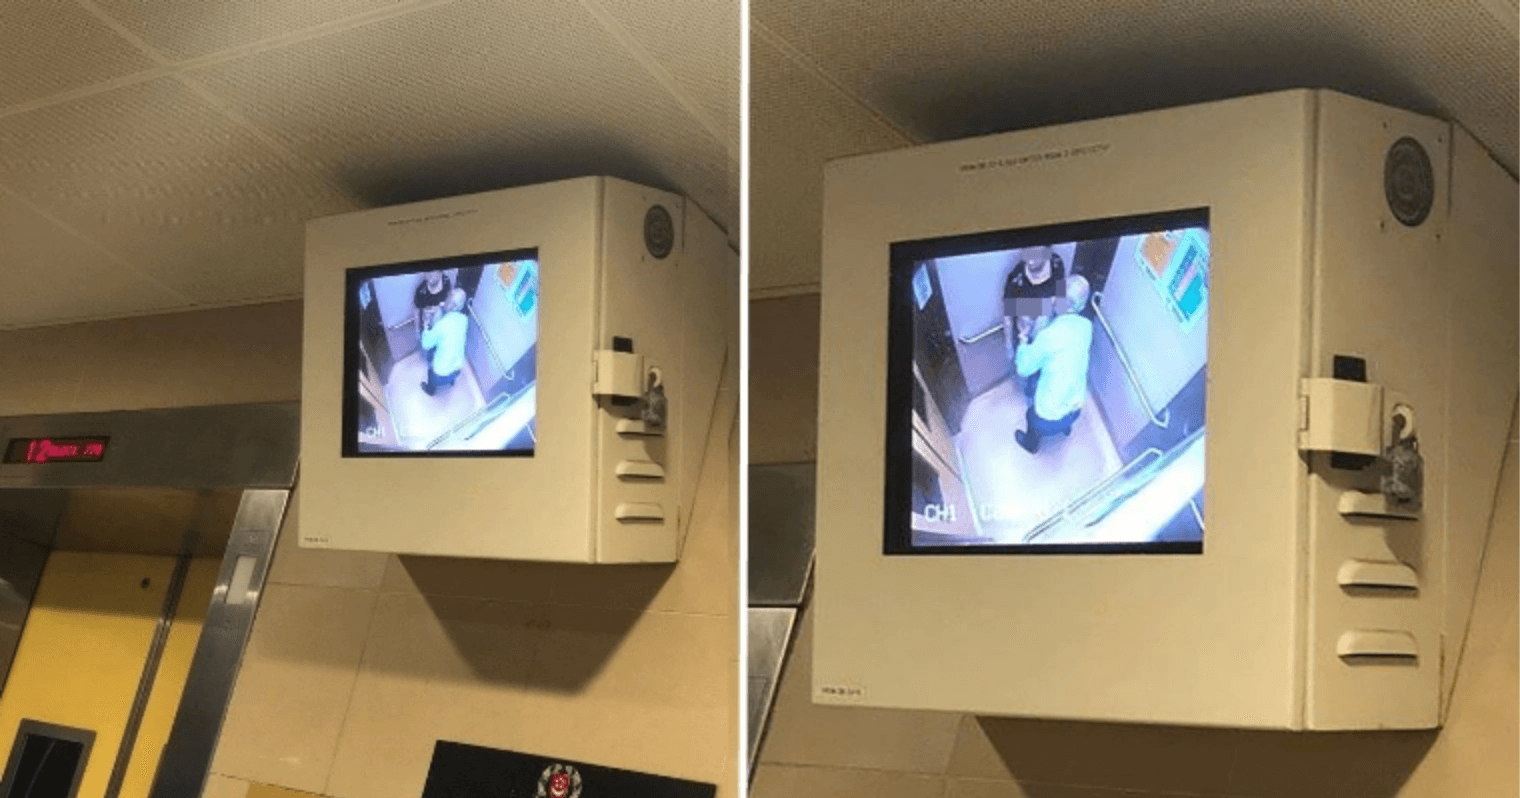 15yo Caught Masturbating, Parents Install CCTV In Bedroom and Bathroom To Monitor Him - WORLD OF BUZZ 1